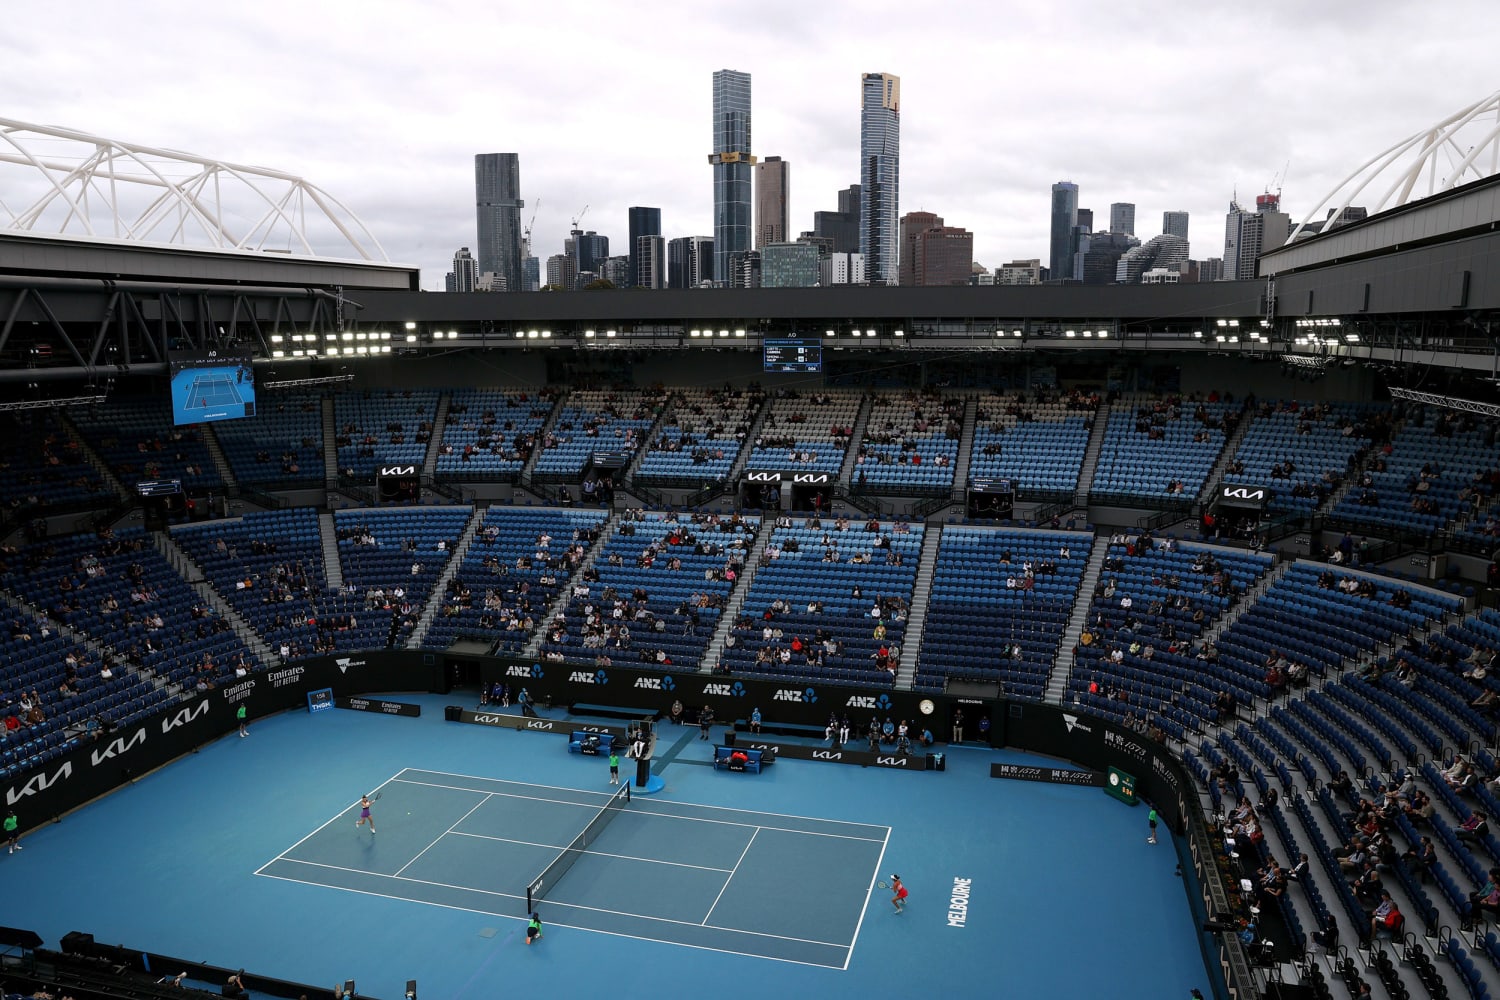 Australian Open gets underway with fans courtside, sporting world adjusts to Covid